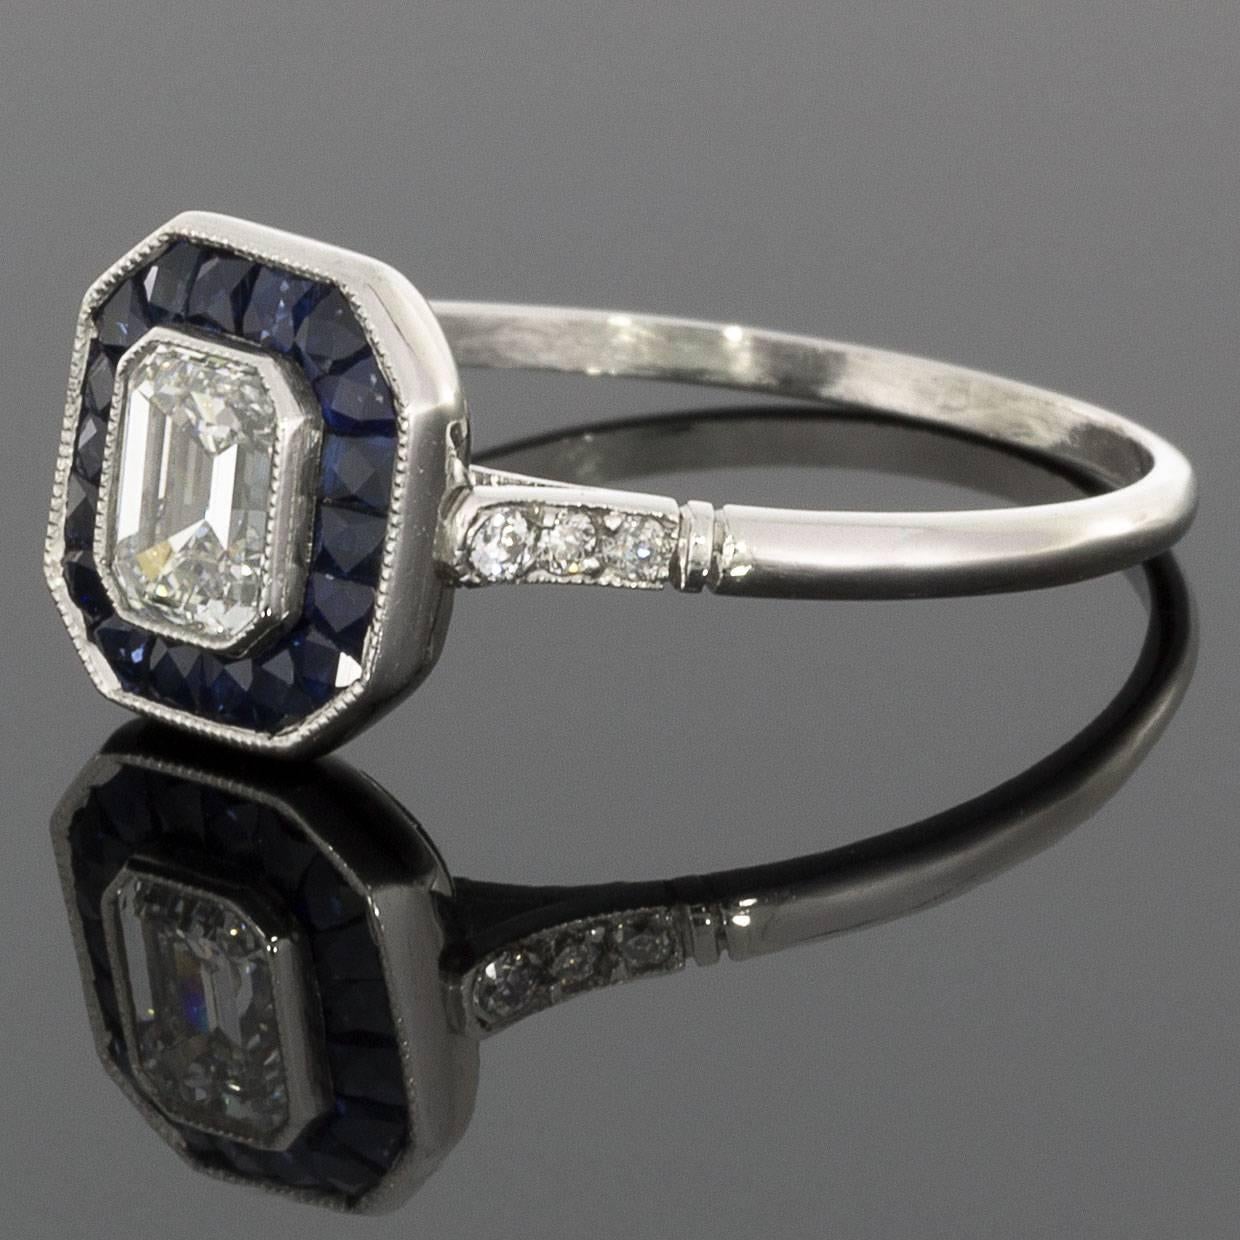 Emerald cut diamonds have a unique sparkle with a beautiful mirrored effect from their step cut. This cut highlights the diamond's clarity, produces dramatic flashes of light, & has an elegant appeal. The center stone in this stunning engagement